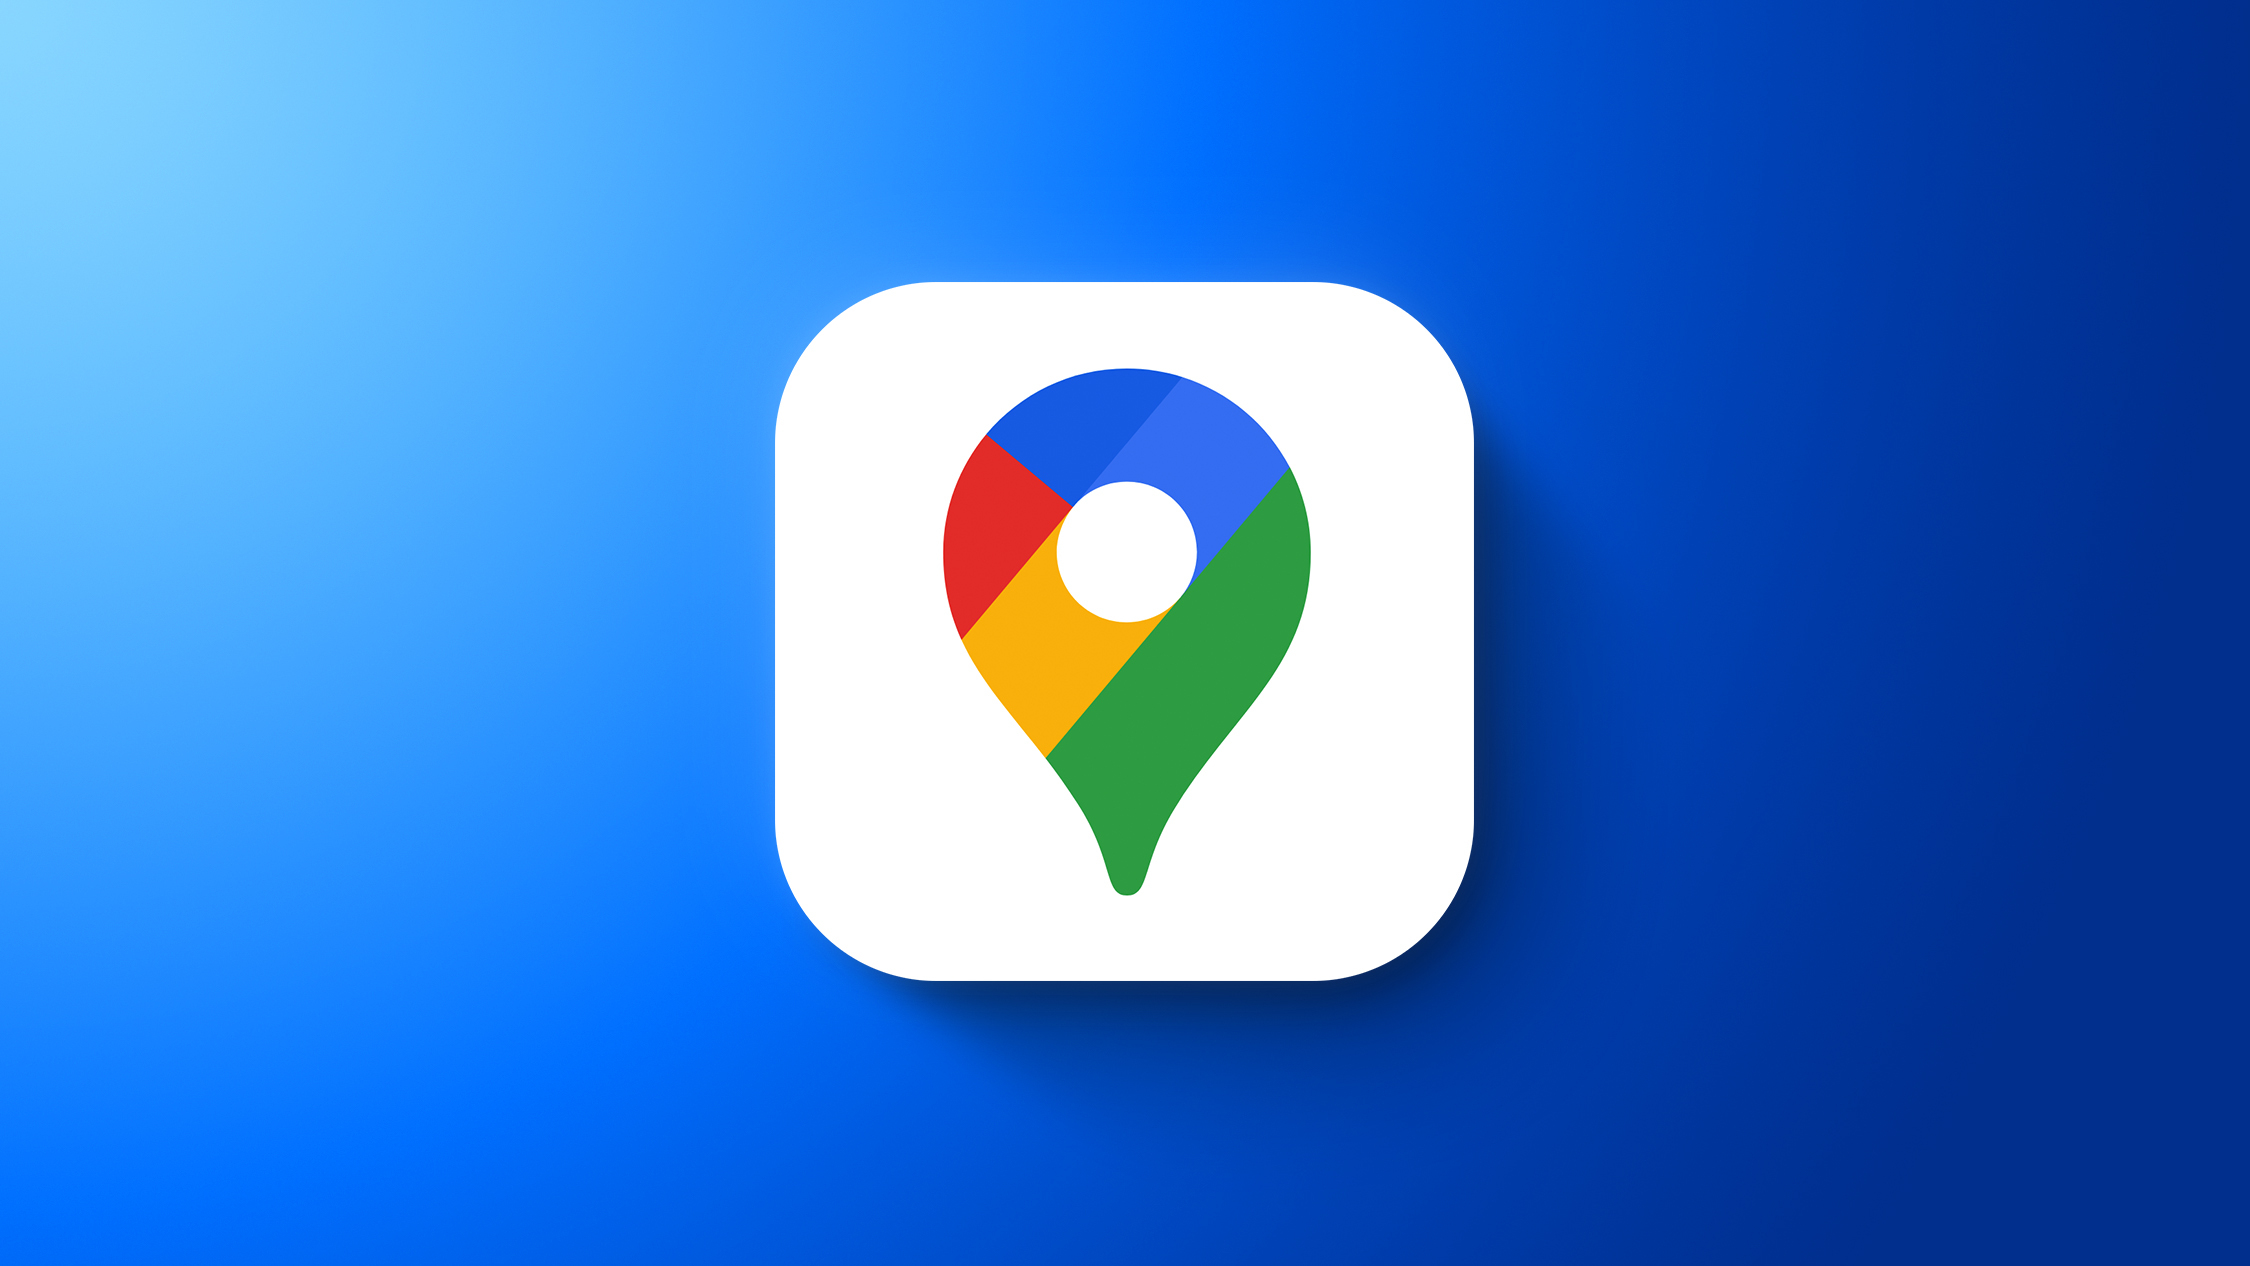 Google Maps for iOS Gaining Augmented Reality Live View Search in Select Cities